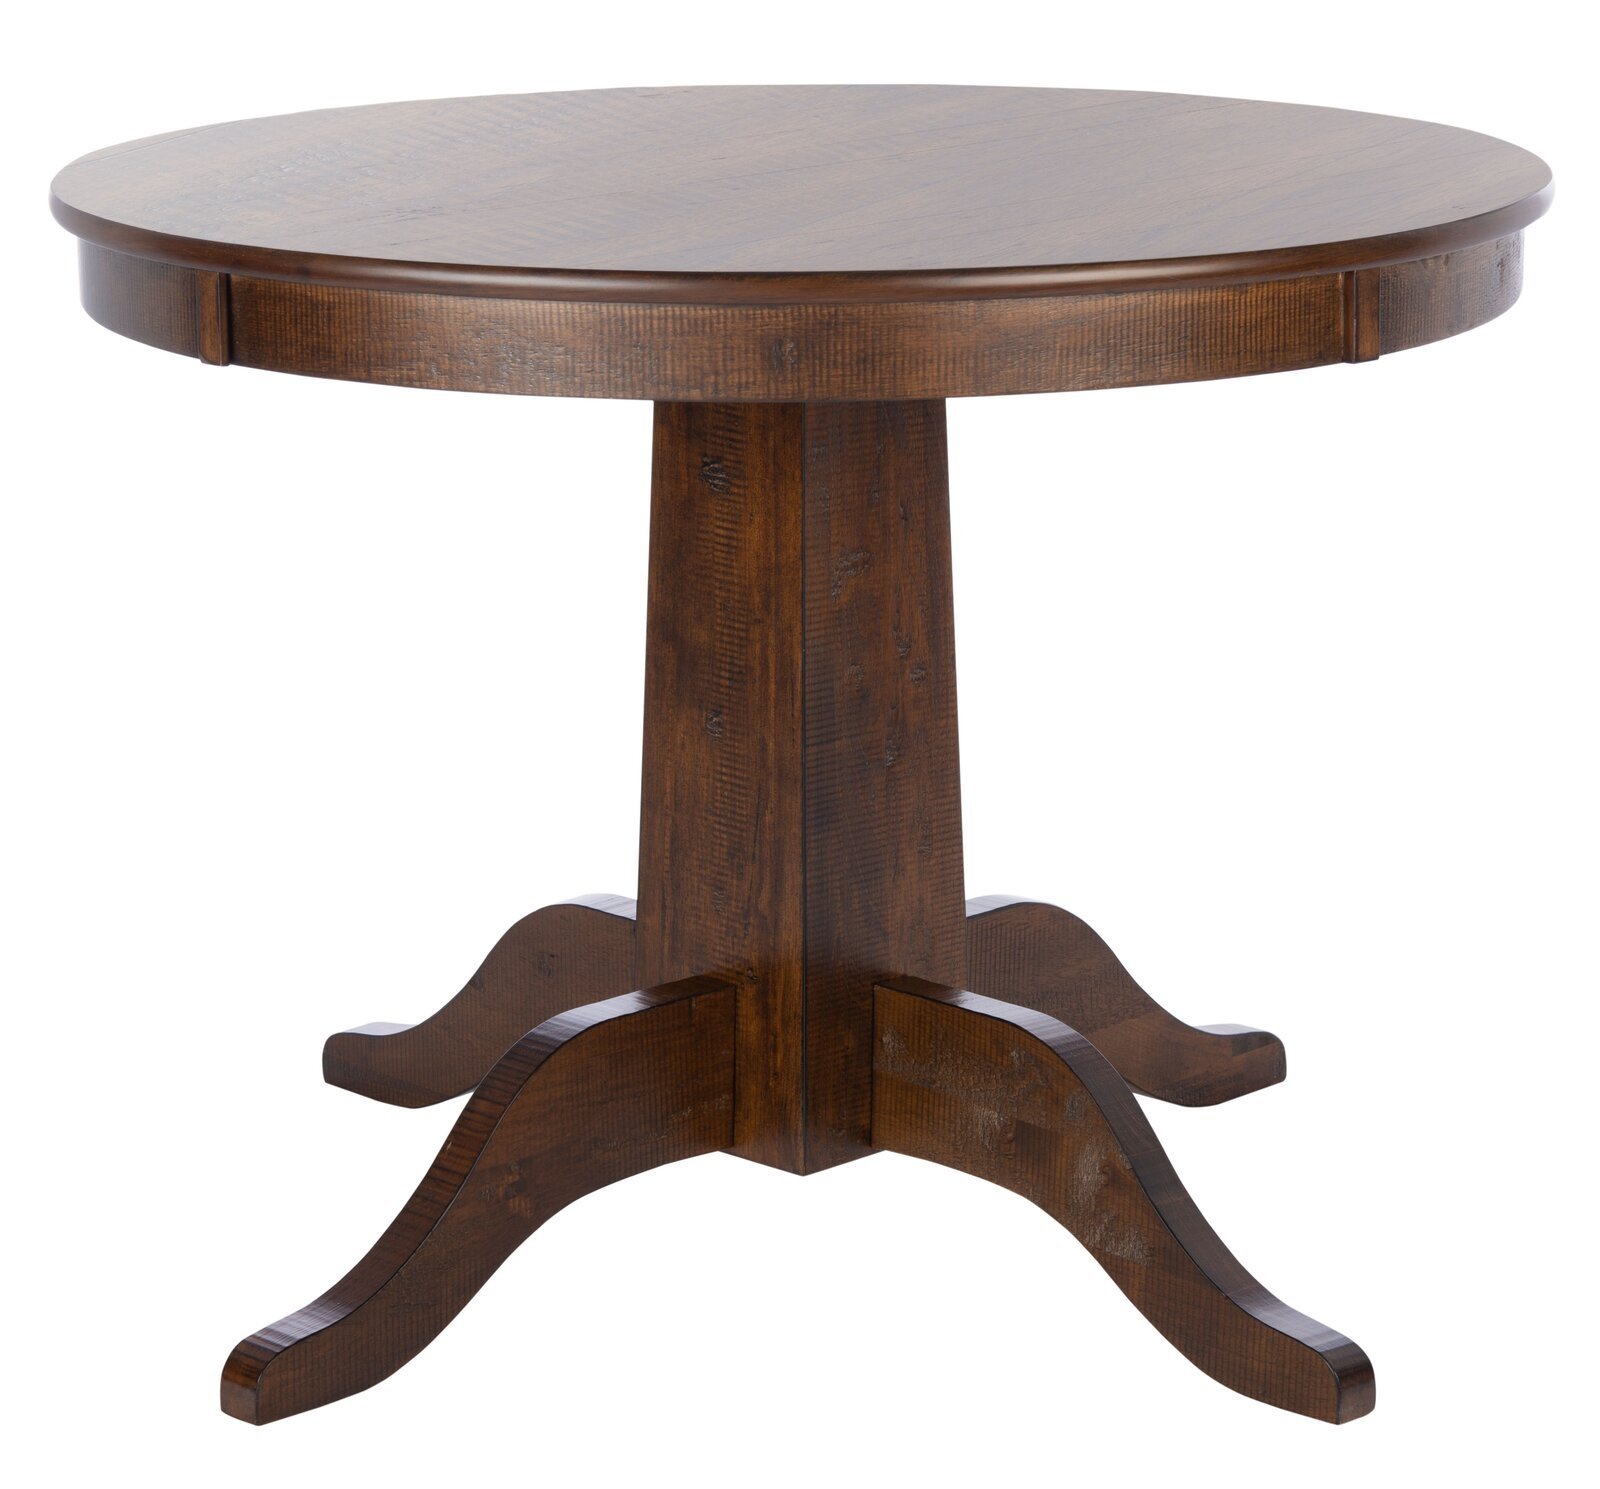 Dining Table - Image 1